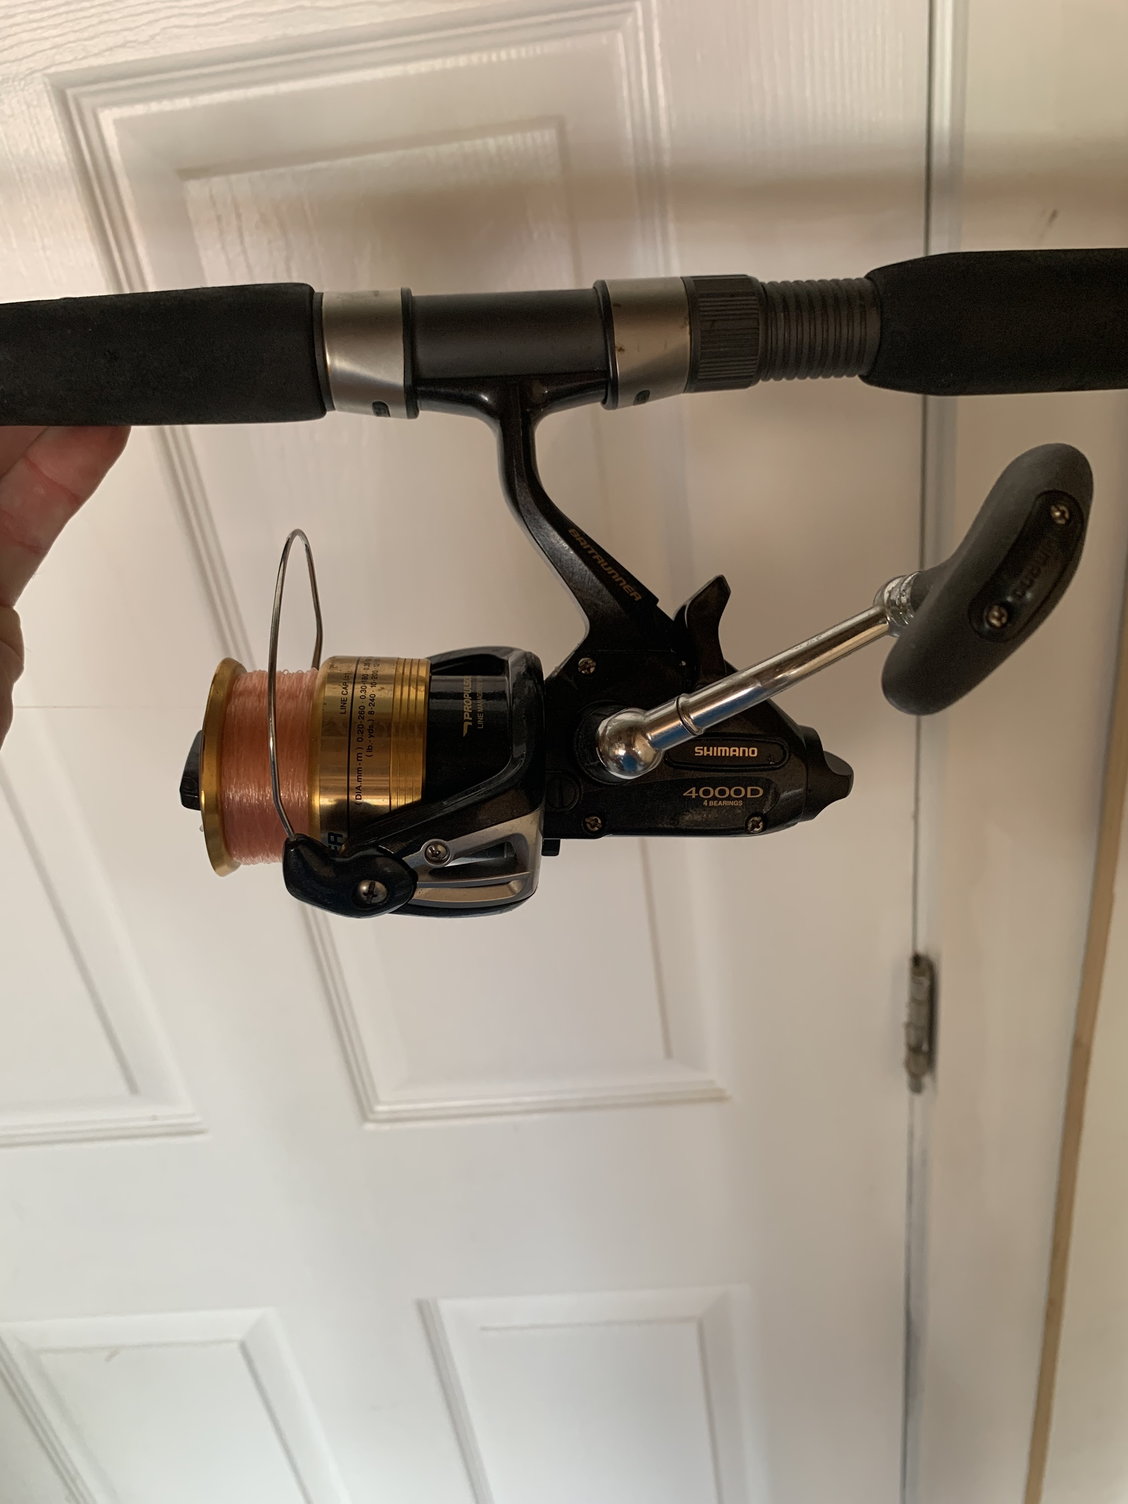 Shimano Thunnus, Baitrunners, misc reels/rods for sale - The Hull Truth -  Boating and Fishing Forum